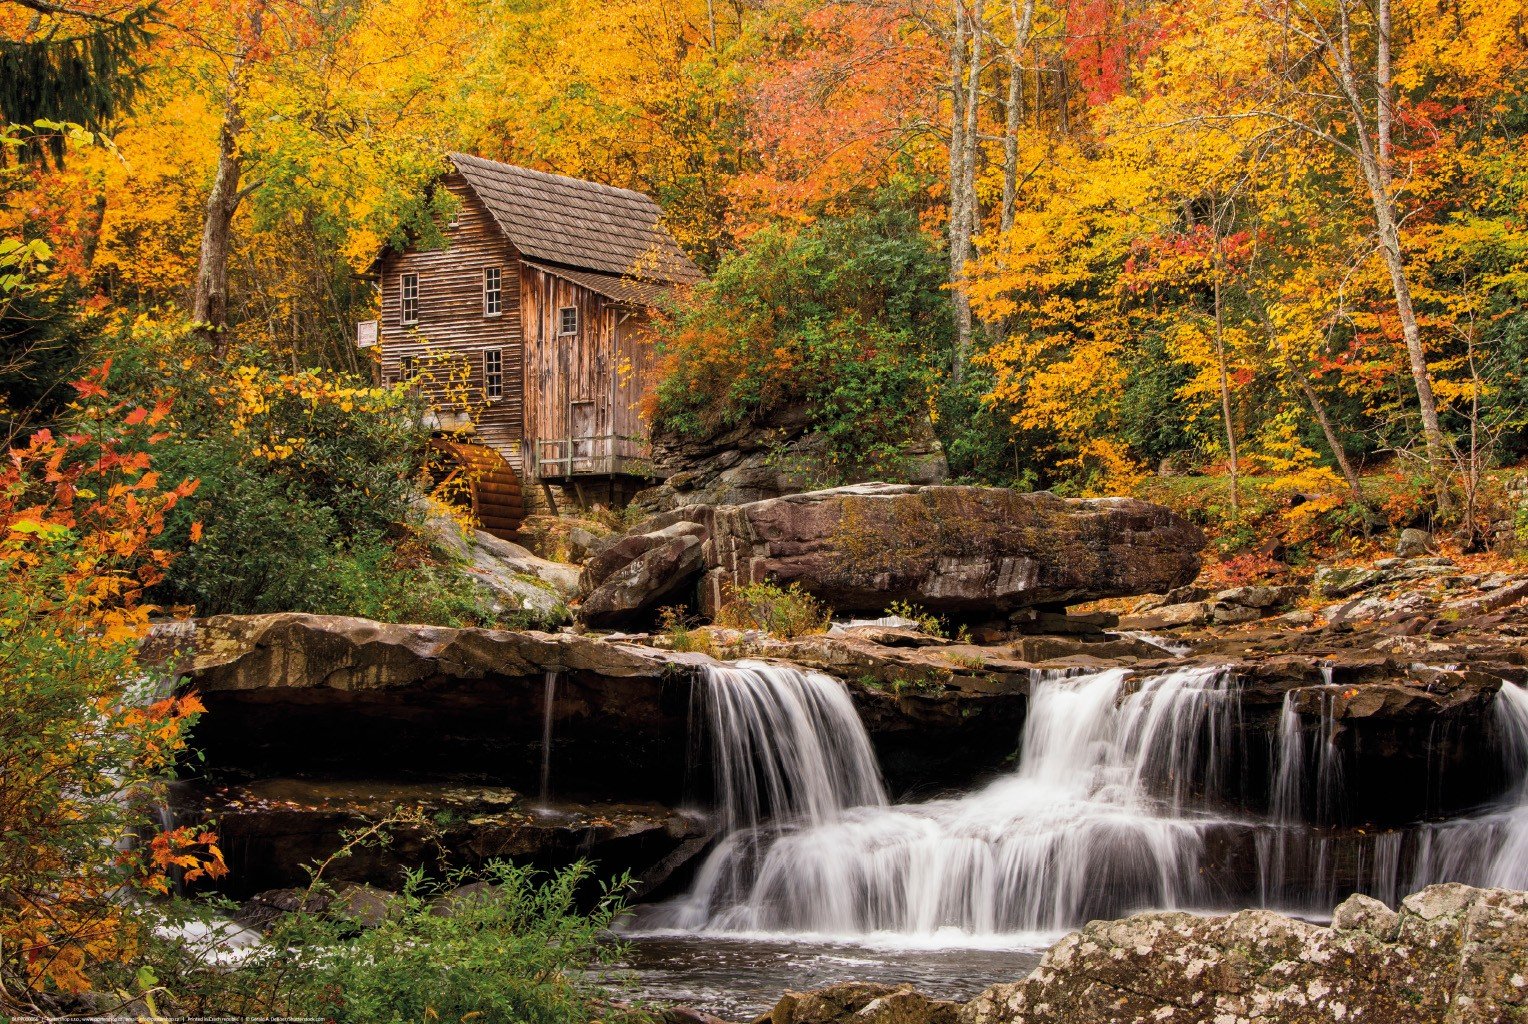 Poster: Mulino d'autunno (Glade Creek Grist Mill)